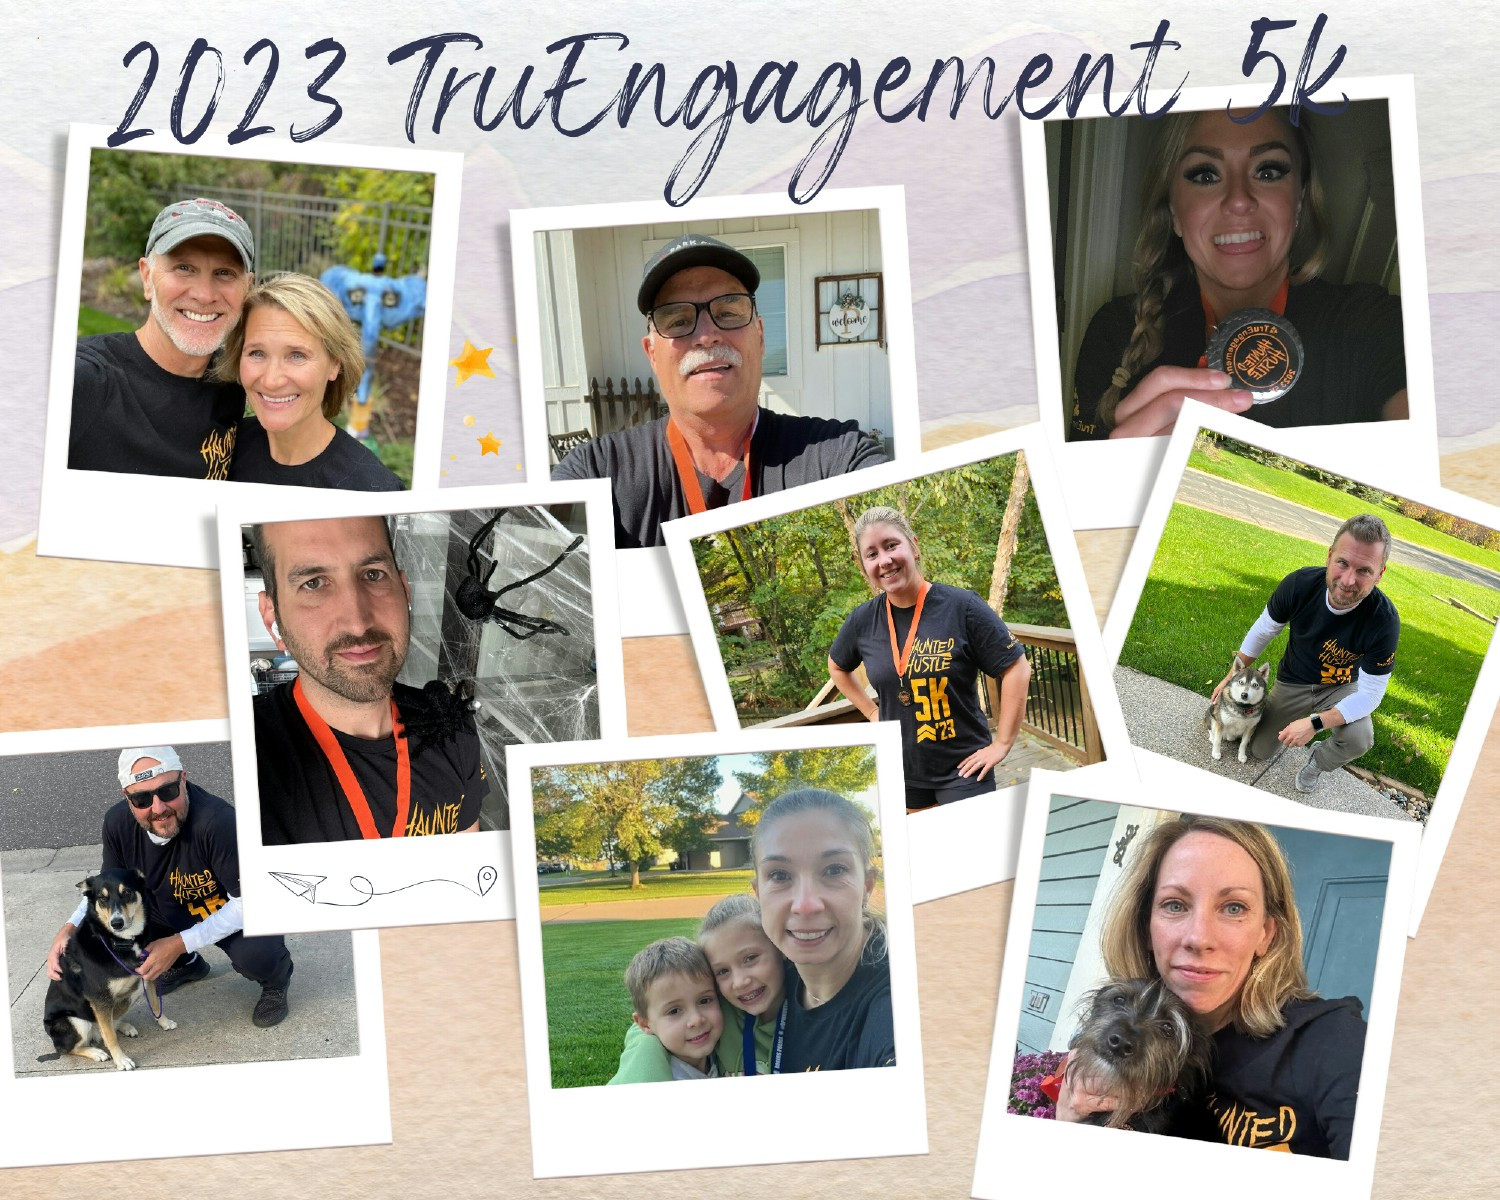 TruChoice employees participated in the 2023 TruEngagement virtual 5K benefiting the Gary Sinise Foundation.